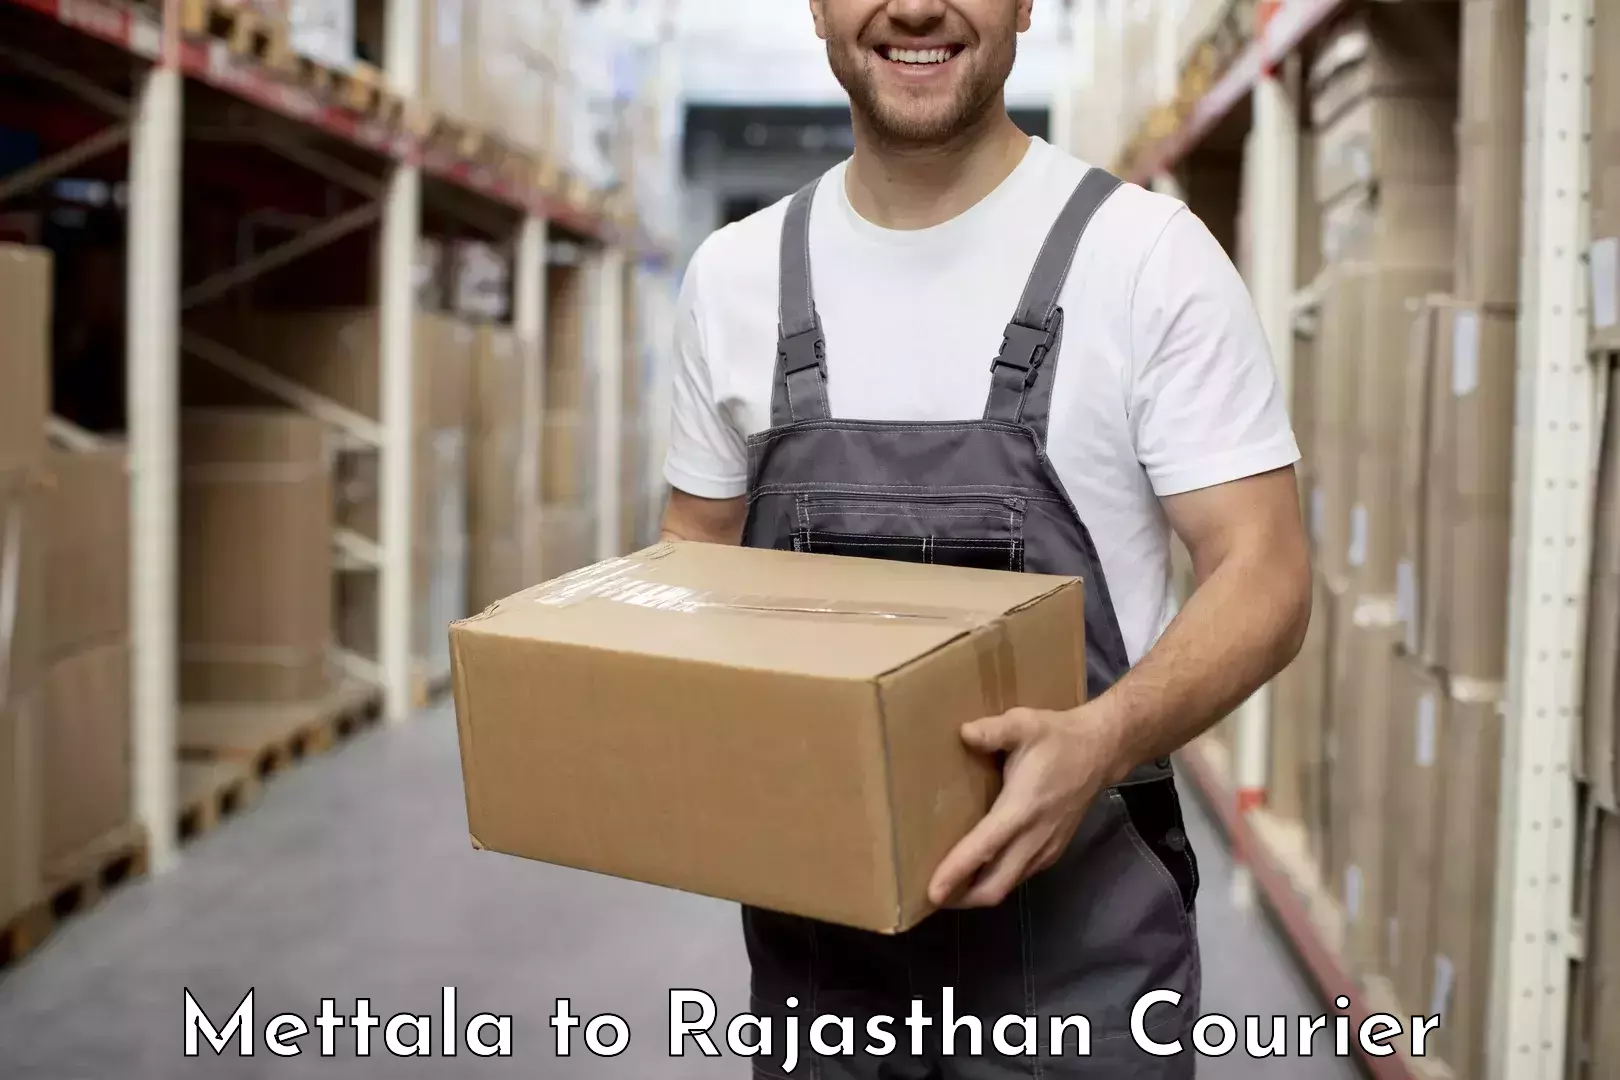 State-of-the-art courier technology Mettala to Piparcity